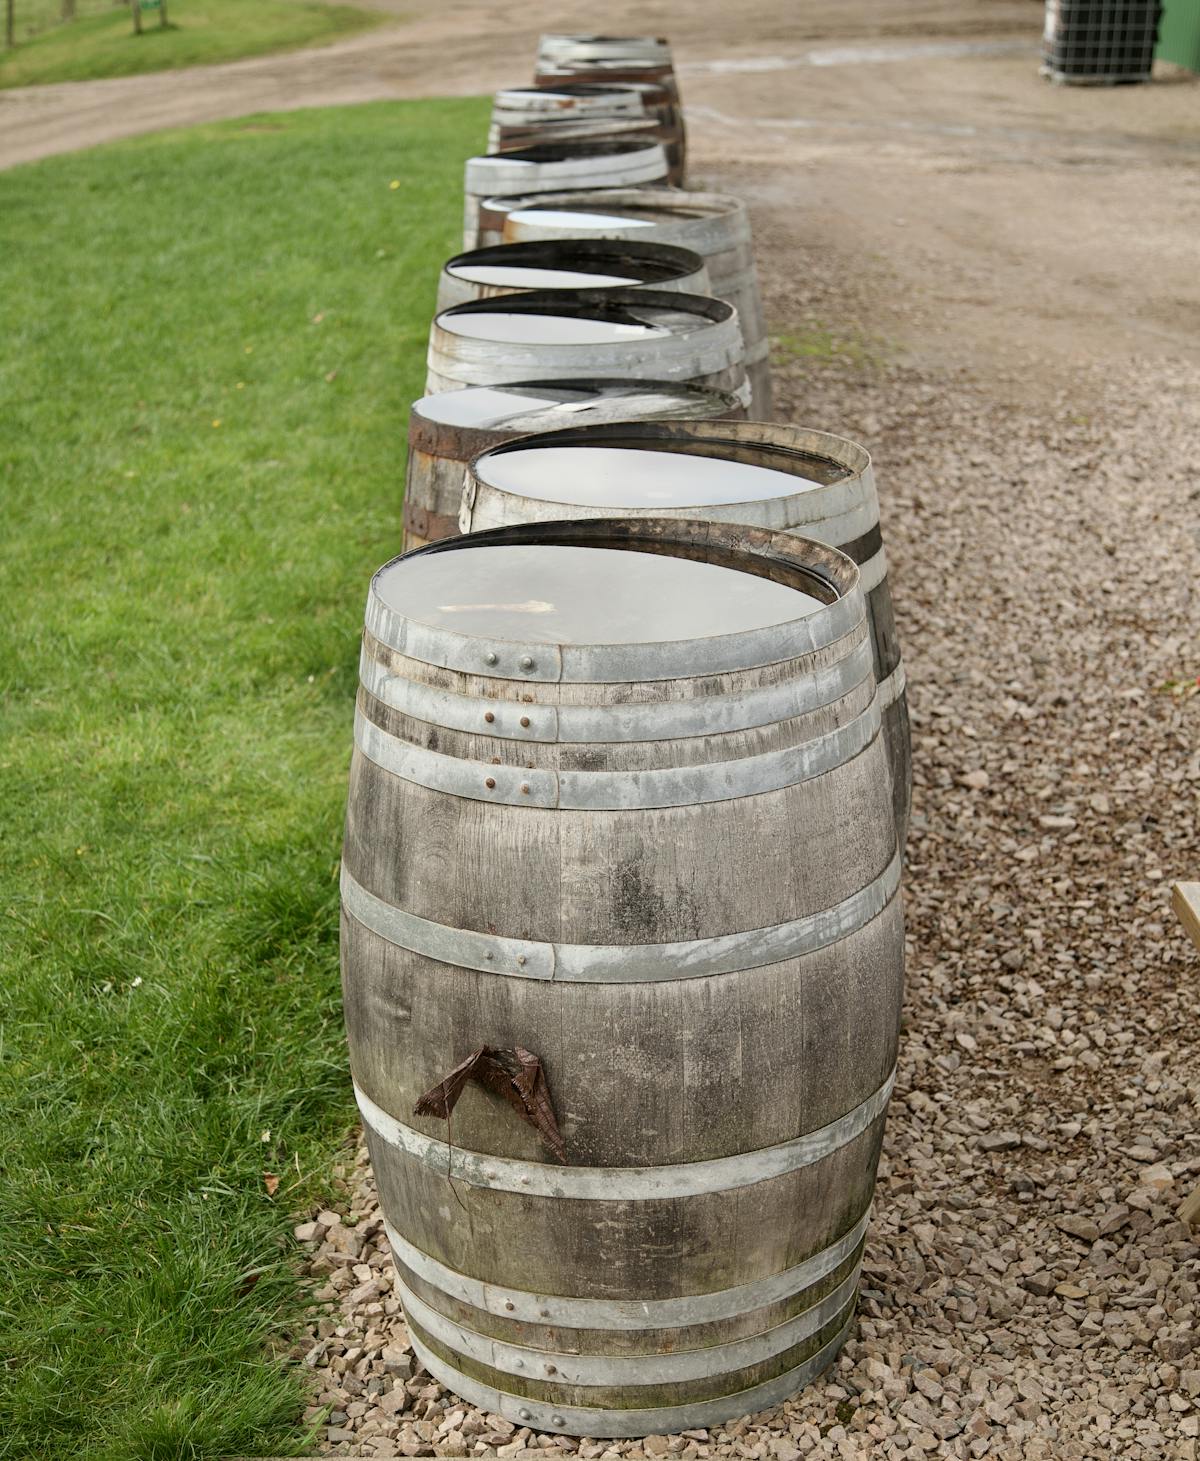 A row of whisky barrels